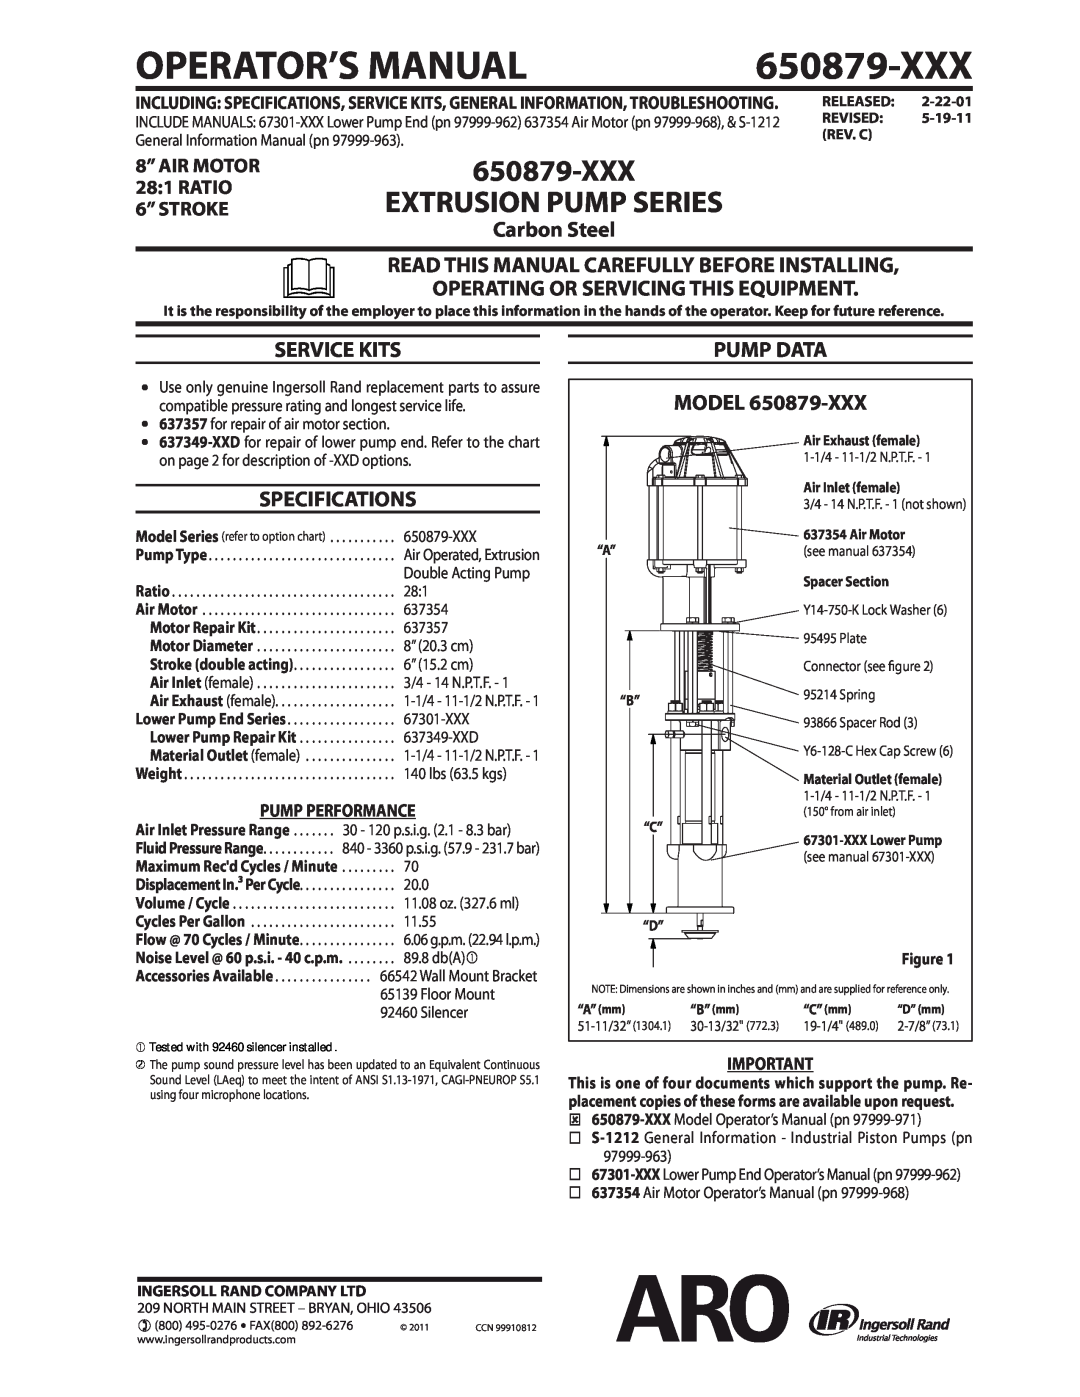 Ingersoll-Rand 650879-XXX specifications Extrusion Pump Series, Carbon Steel READ THIS MANUAL CAREFULLY BEFORE INSTALLING 